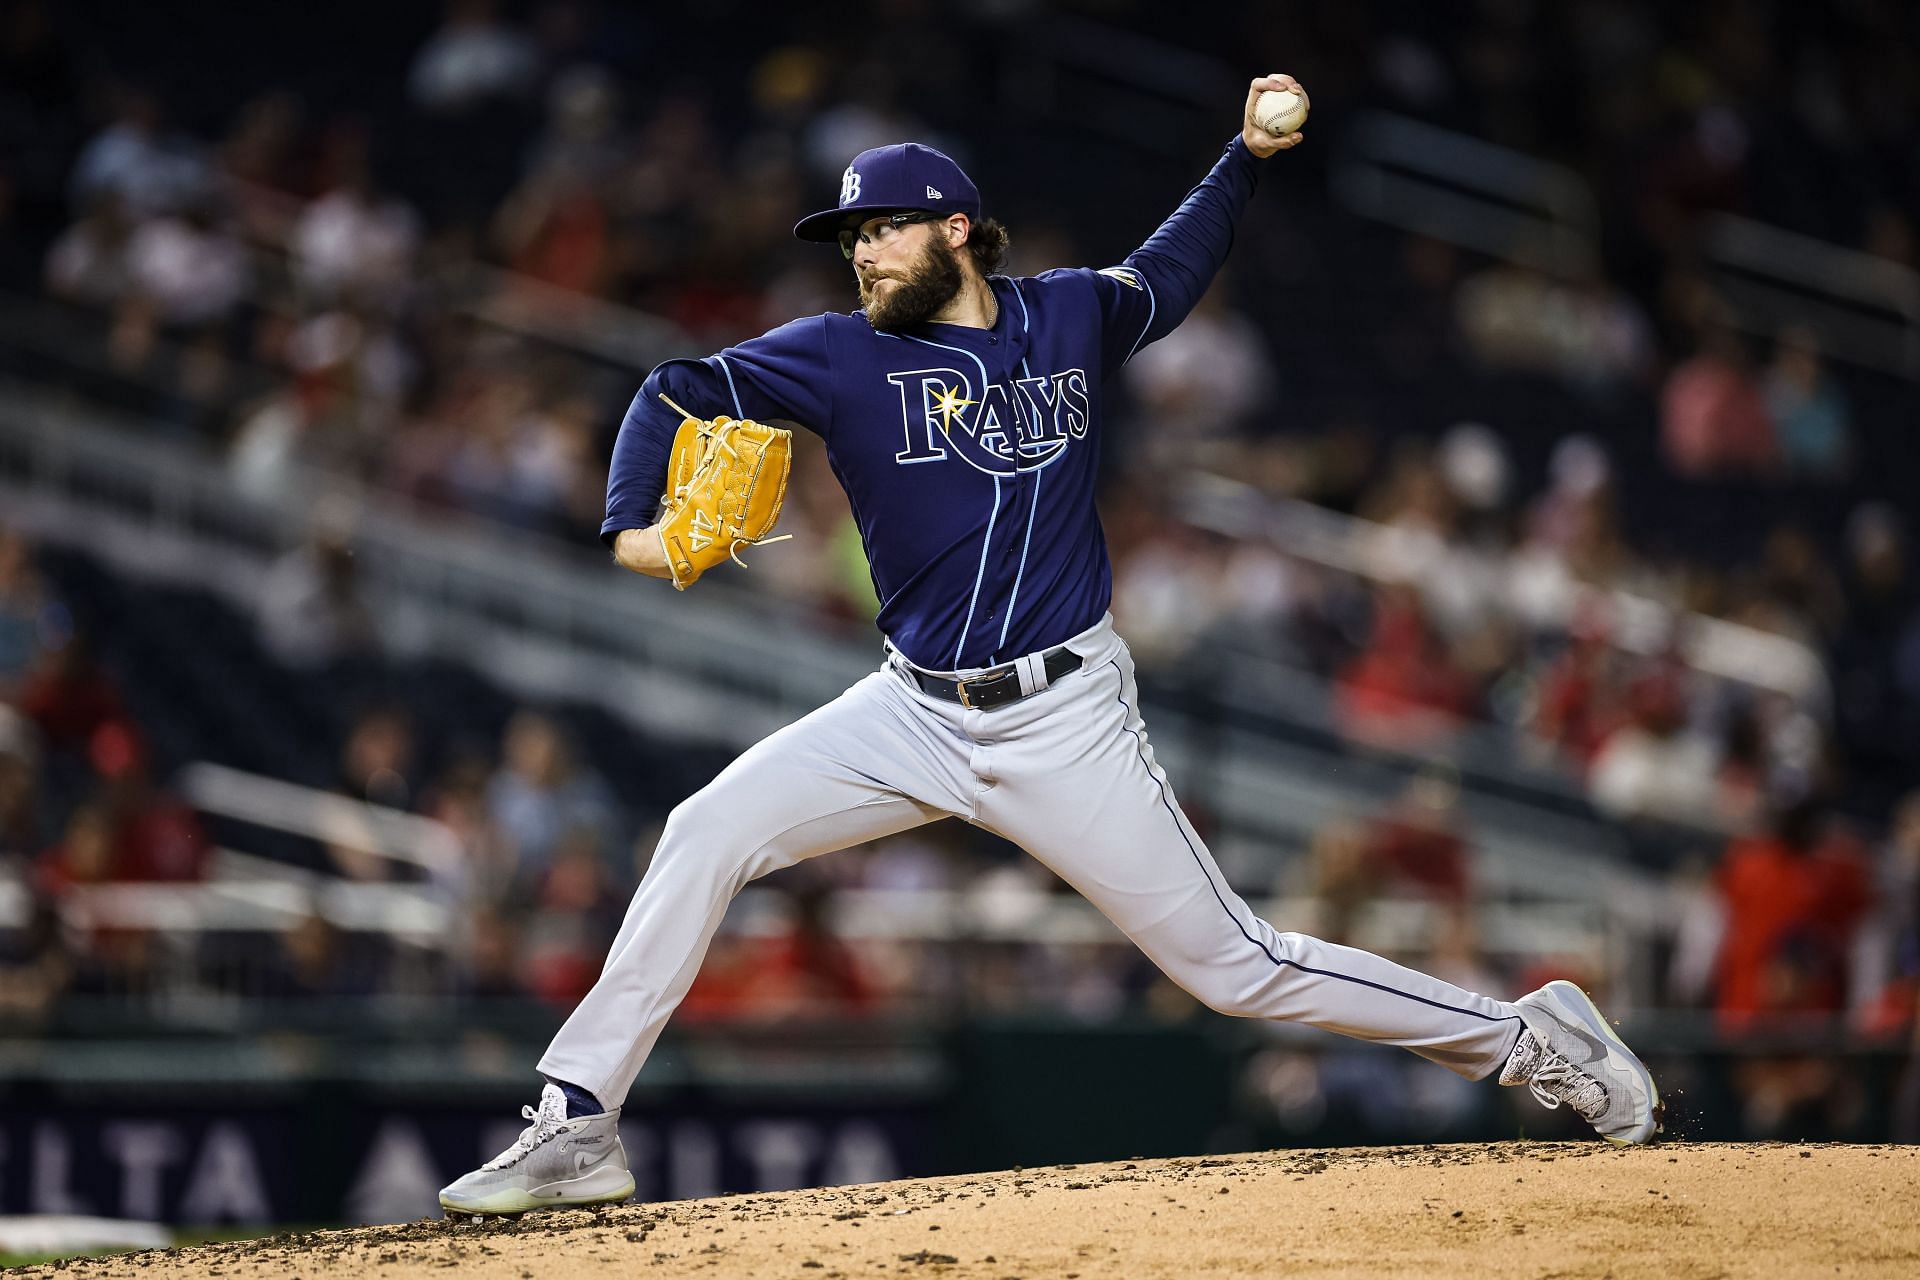 Tampa Bay Rays pitcher Josh Fleming delivers against the Washington Nationals.